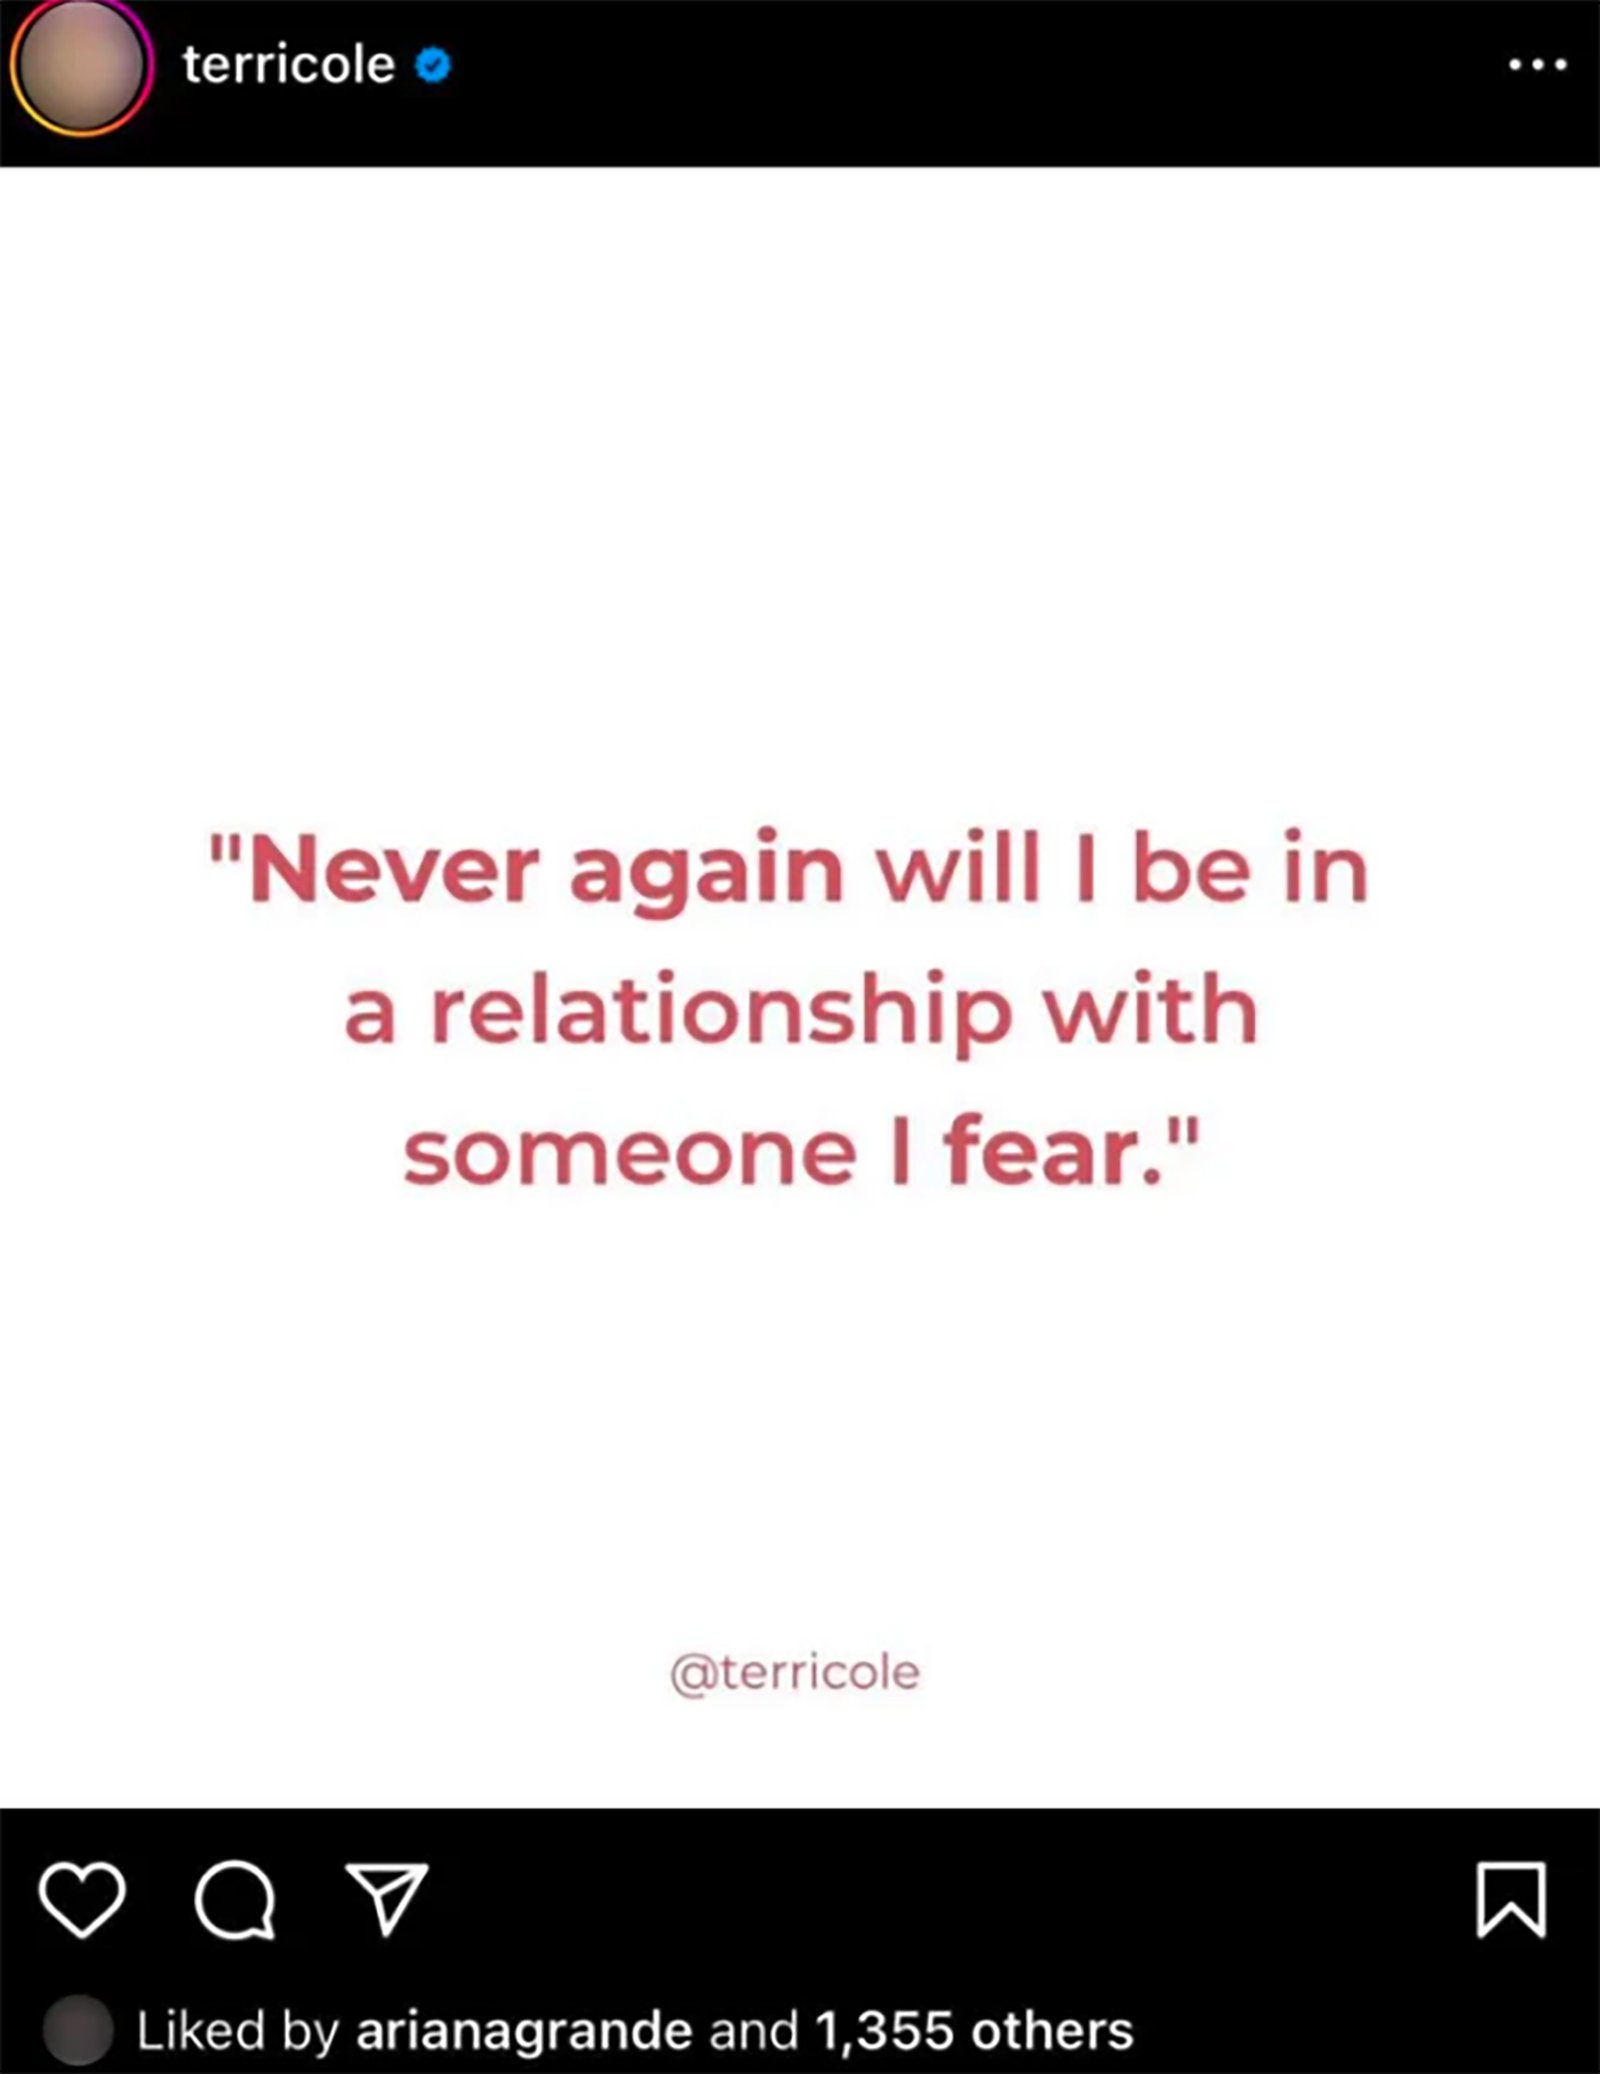 Instagram post reading "Never again will I be in a relationship with someone I fear."